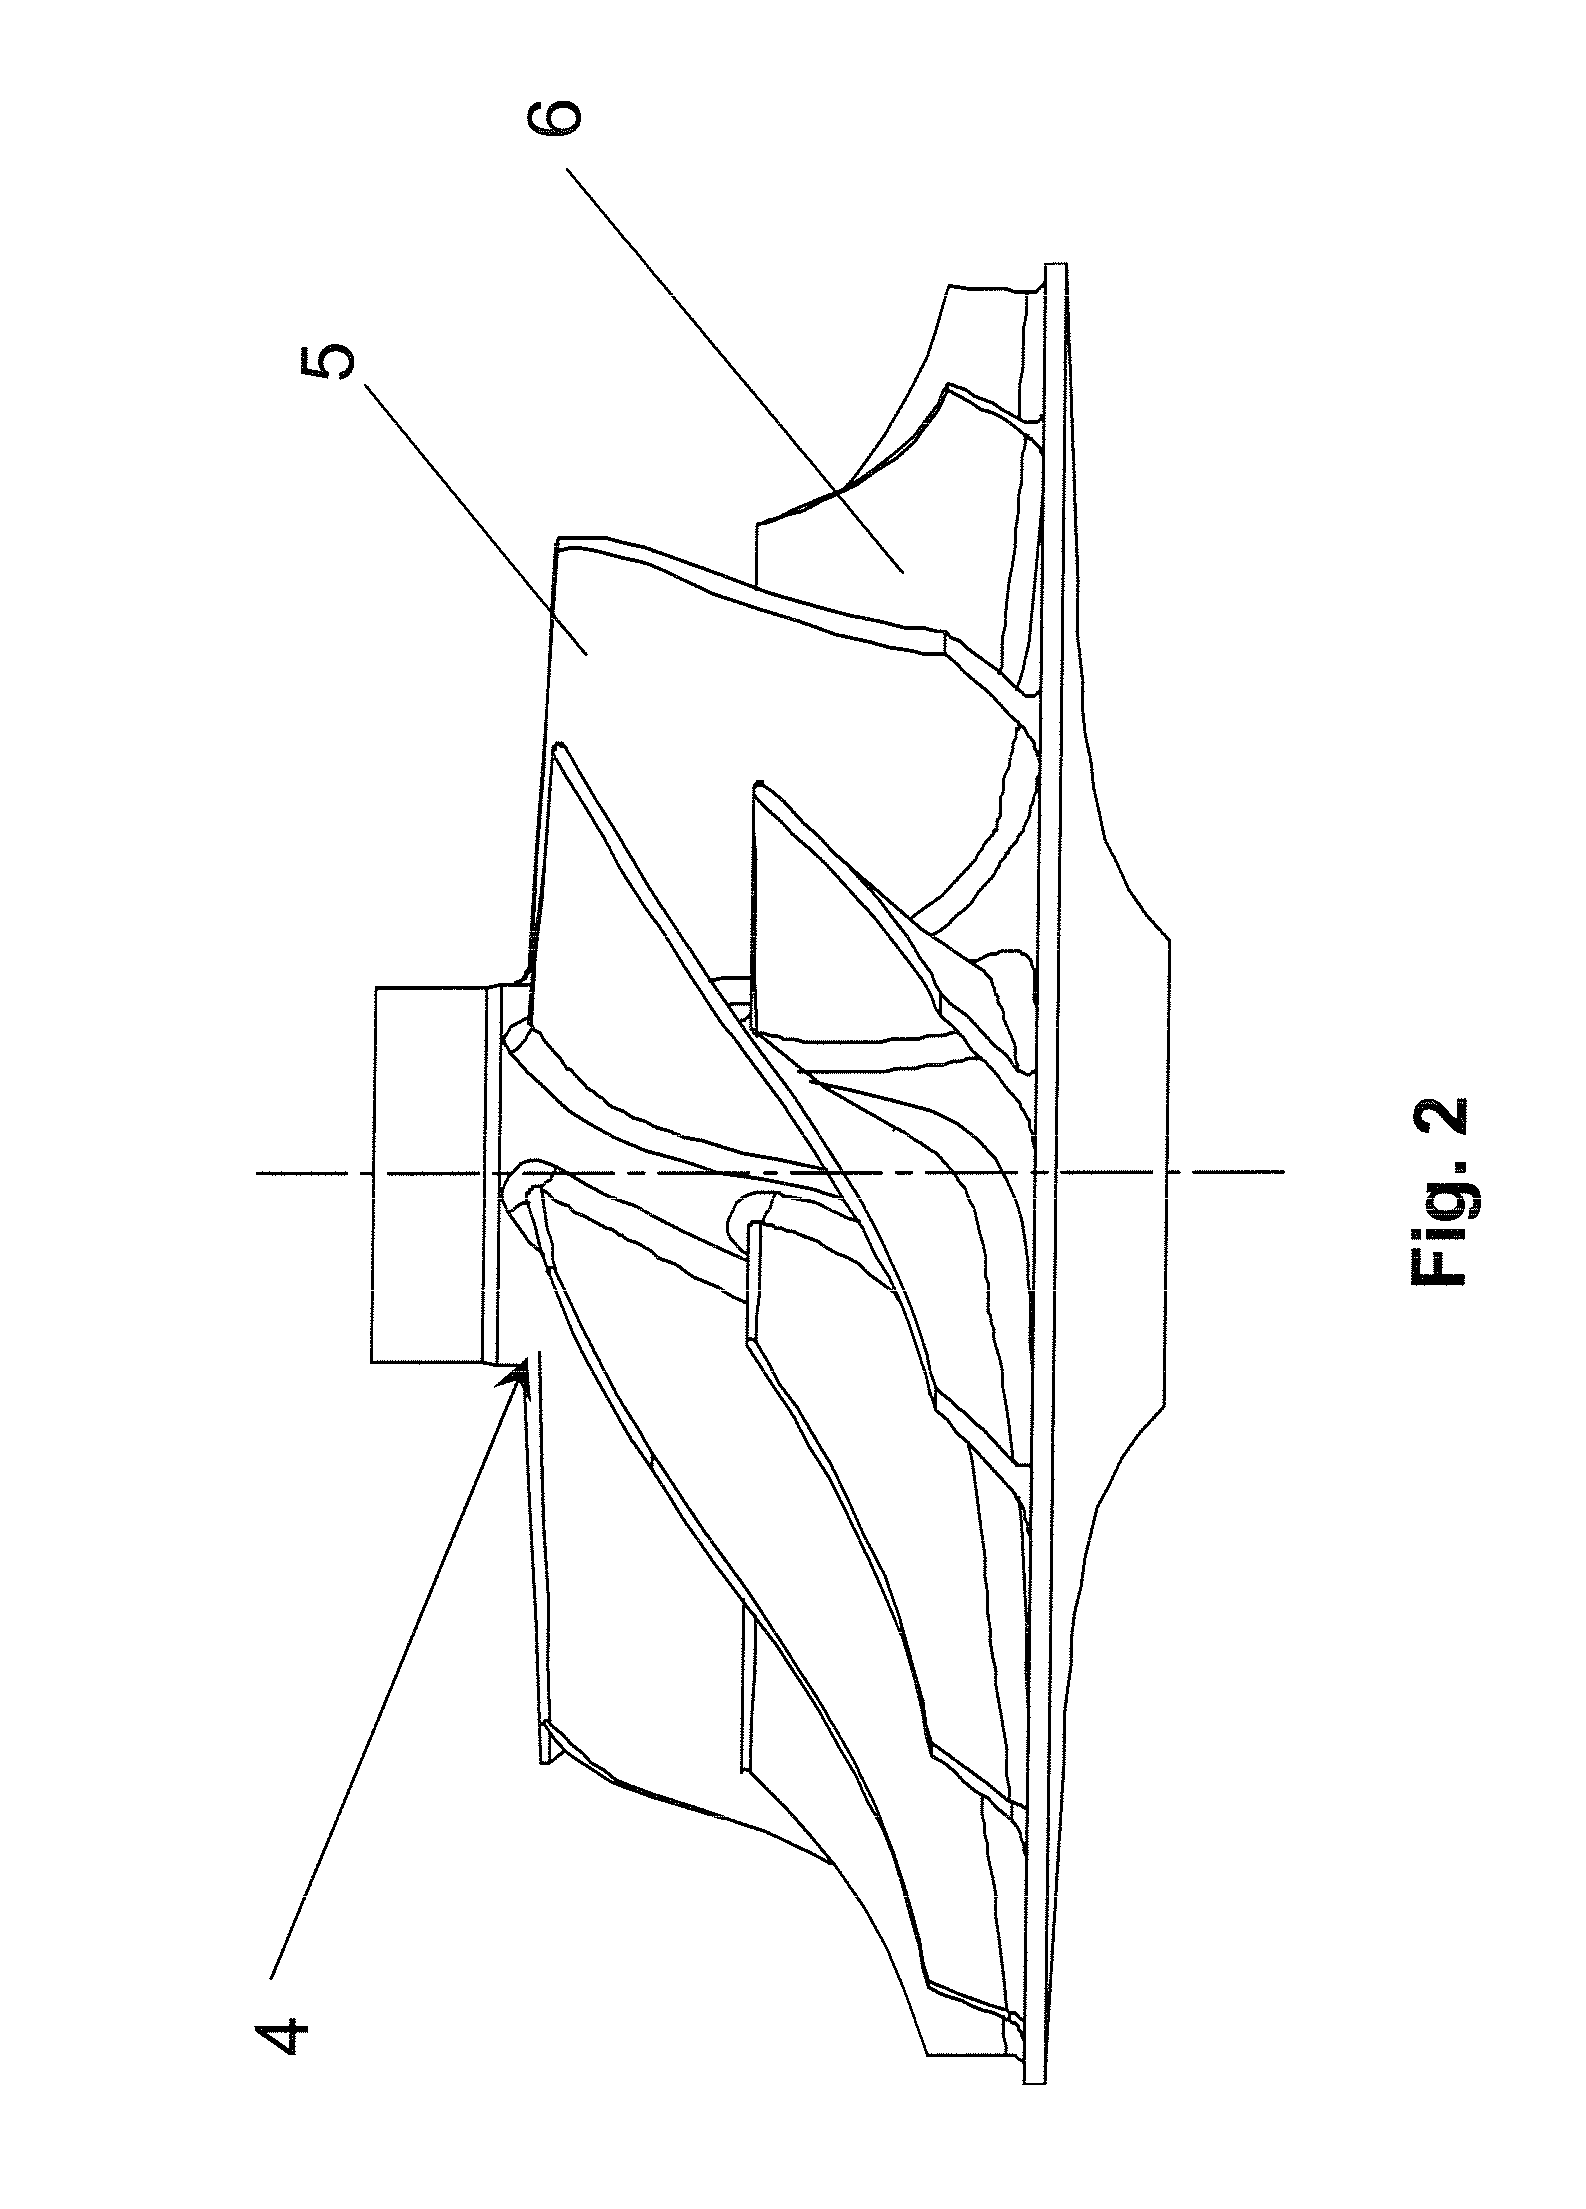 Method for rapid generation of multiple investment cast parts such as turbine or compressor wheels